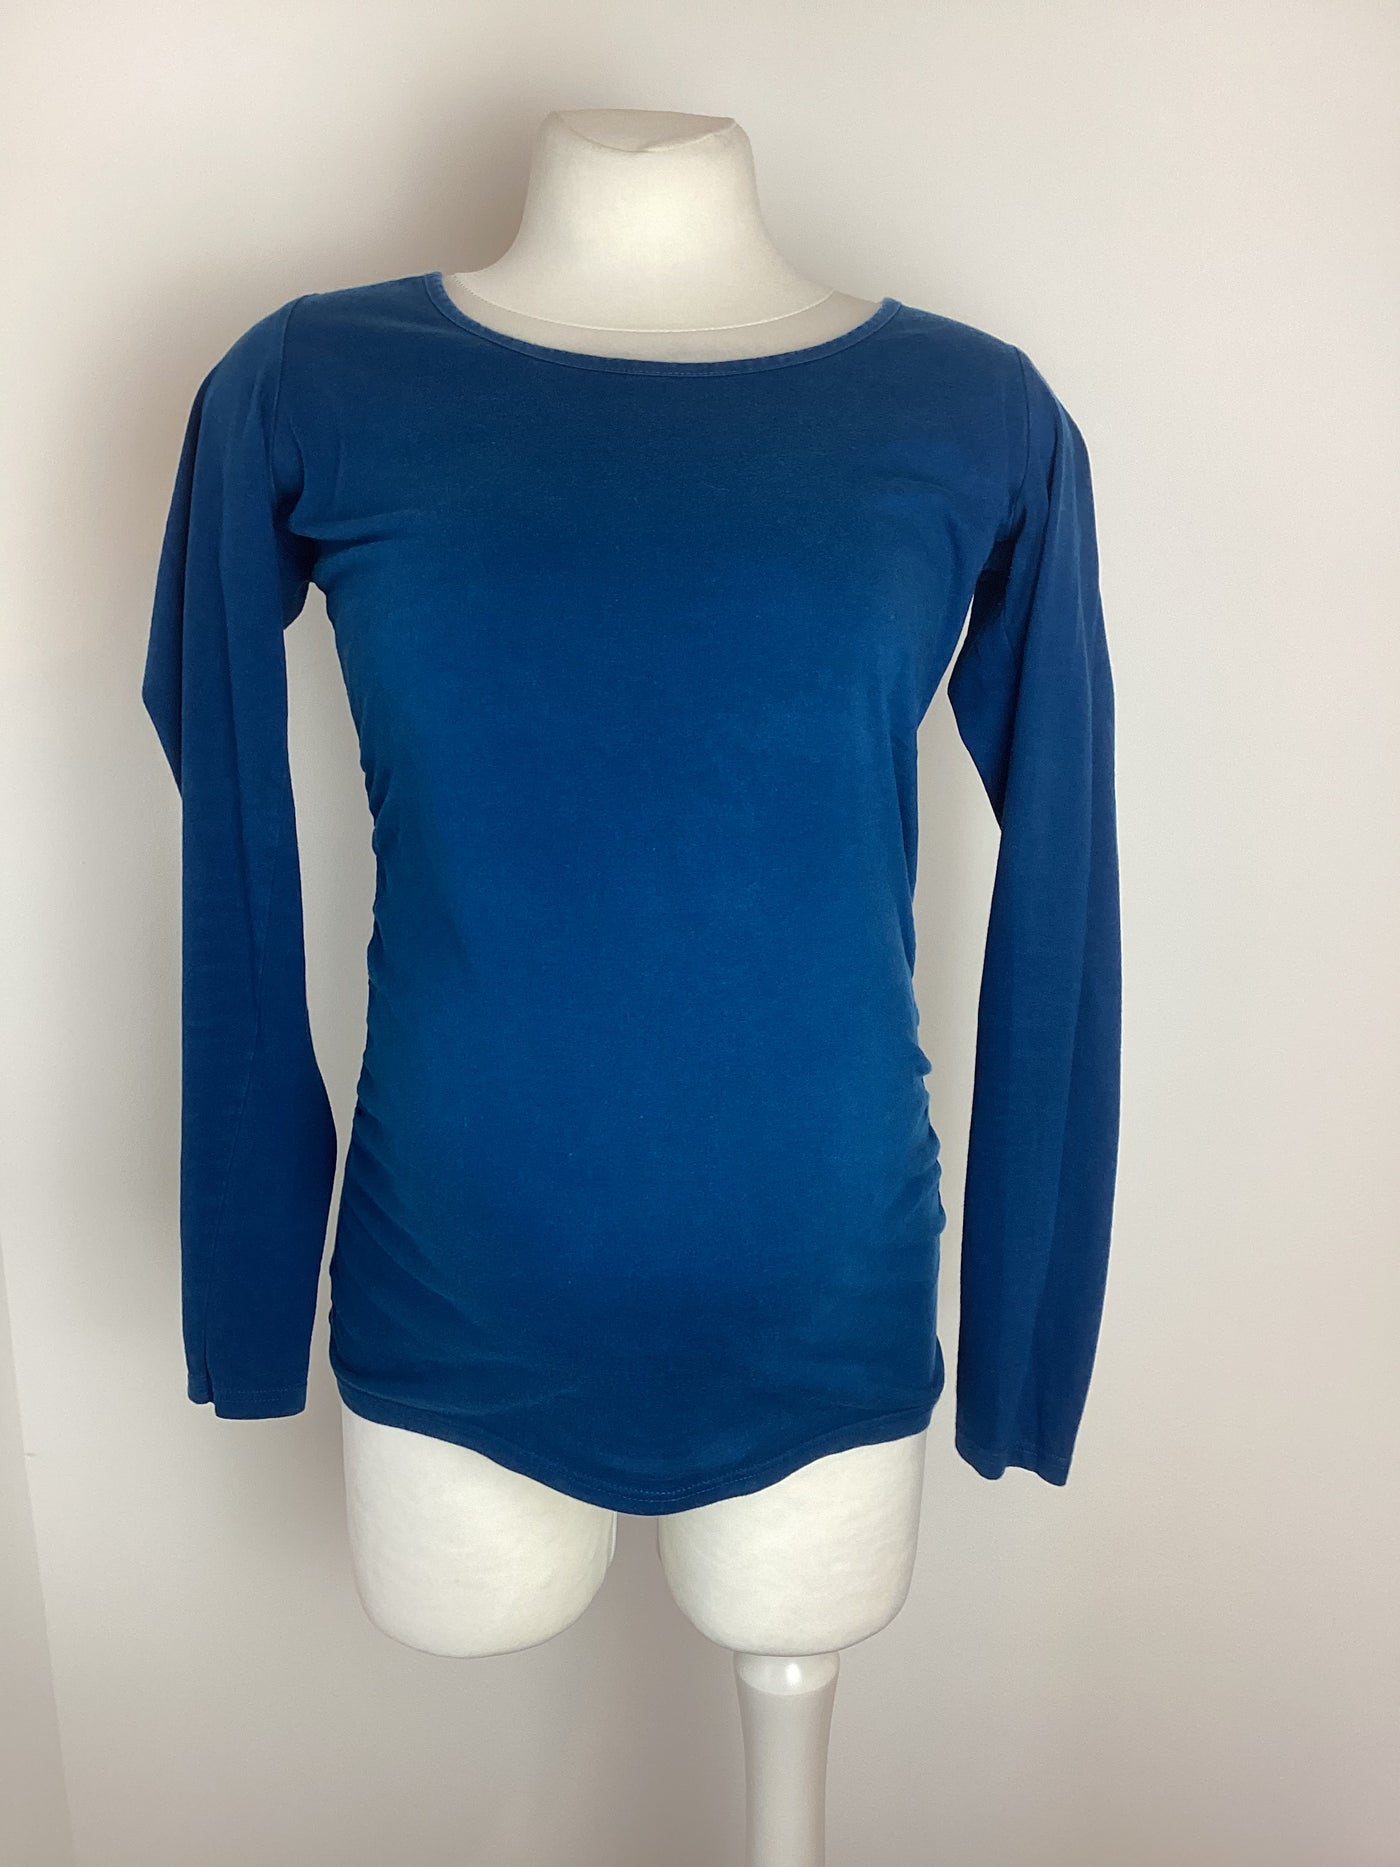 Dorothy Perkins Maternity teal long sleeved top - Size 8